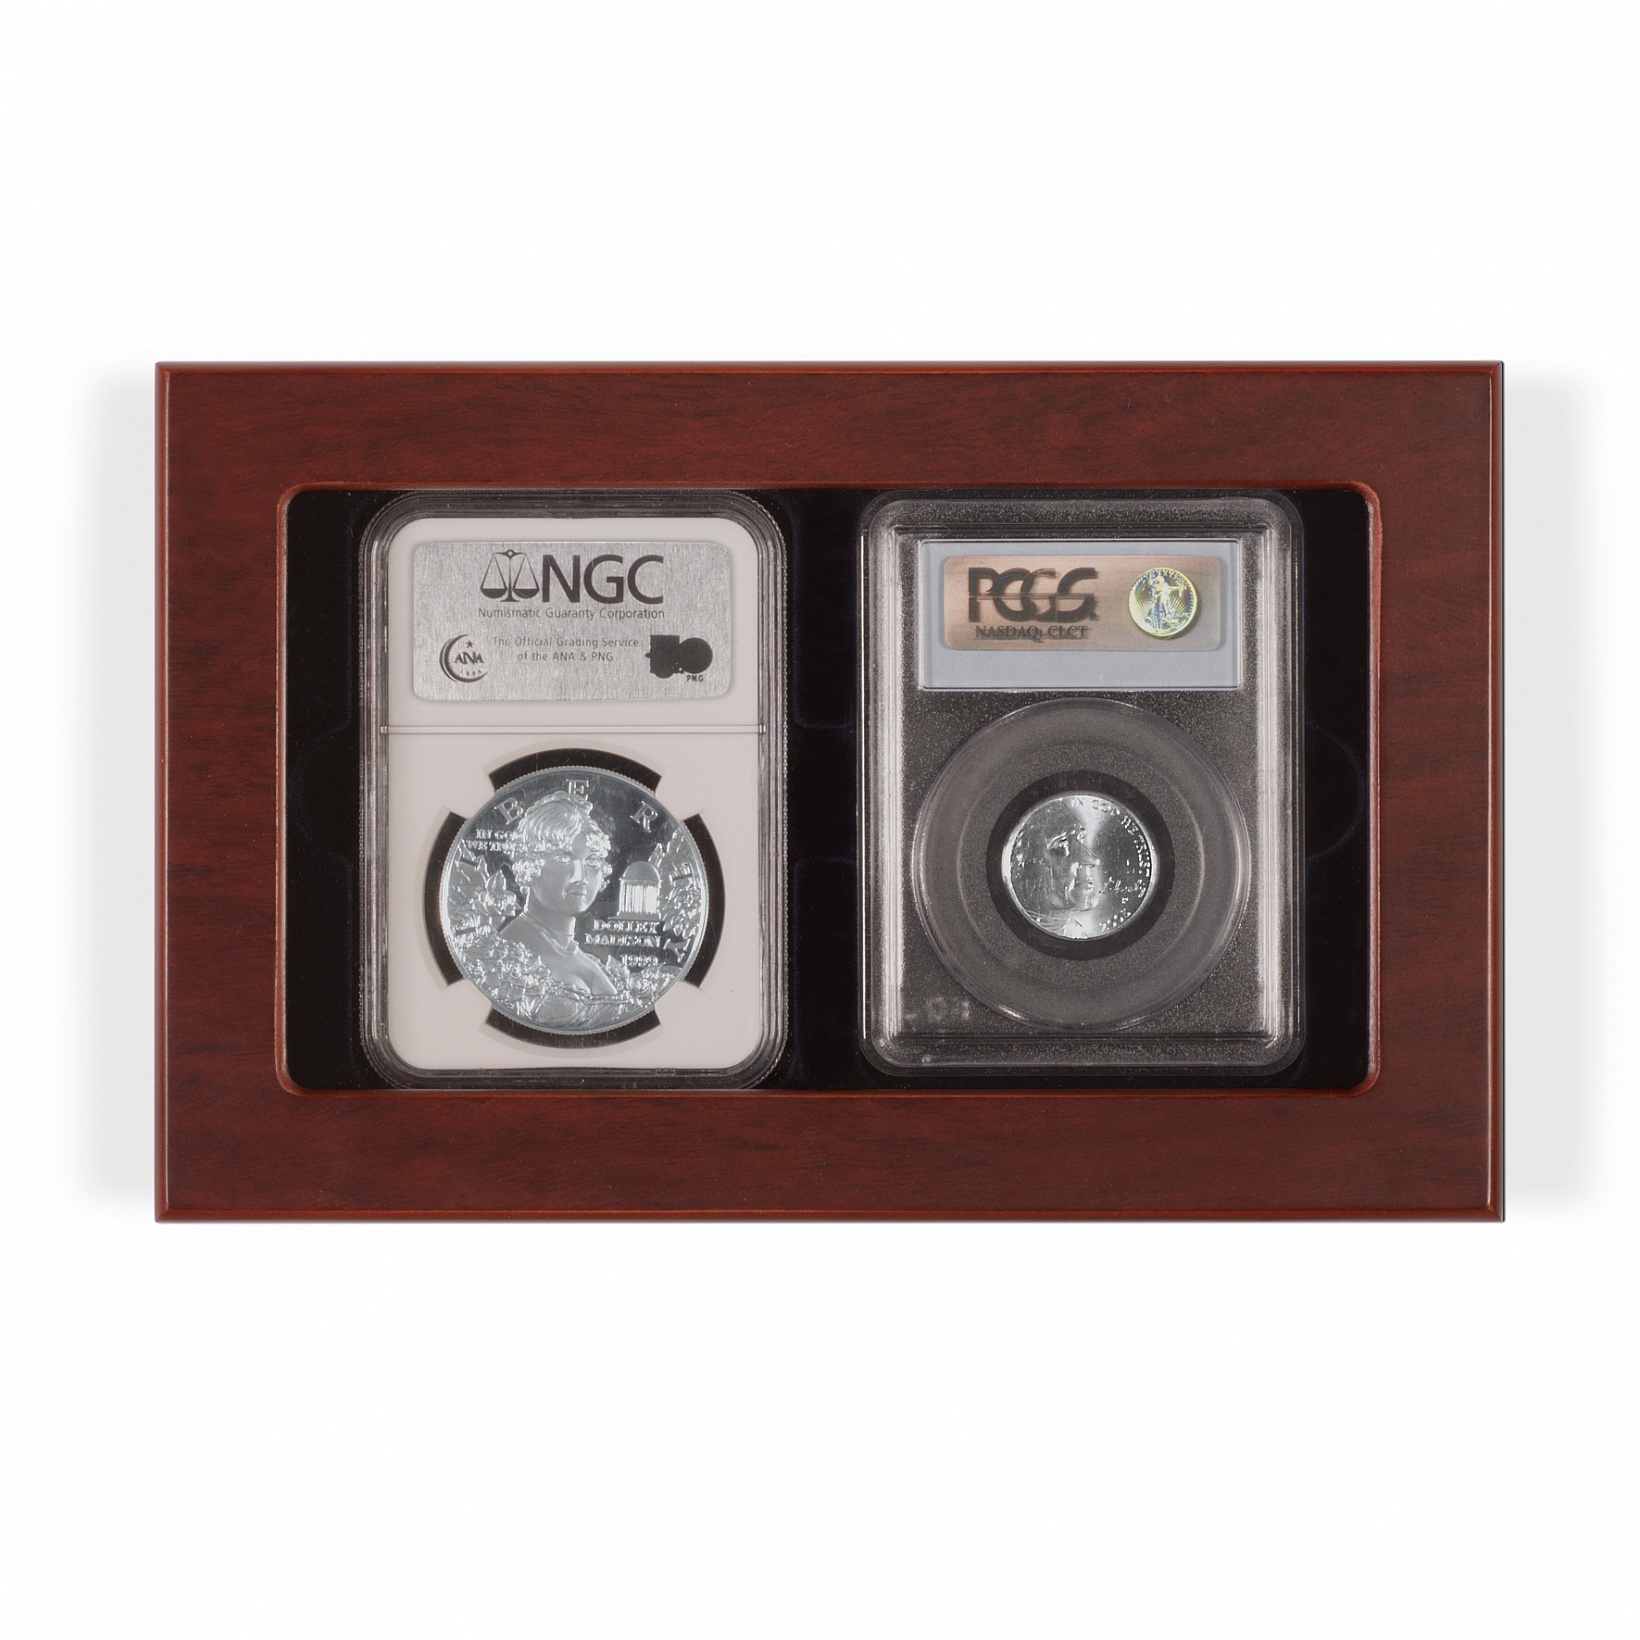 PCGS or ANA Mahogany Finish Wood Display Box For 1 Certified Coin Slab NGC 